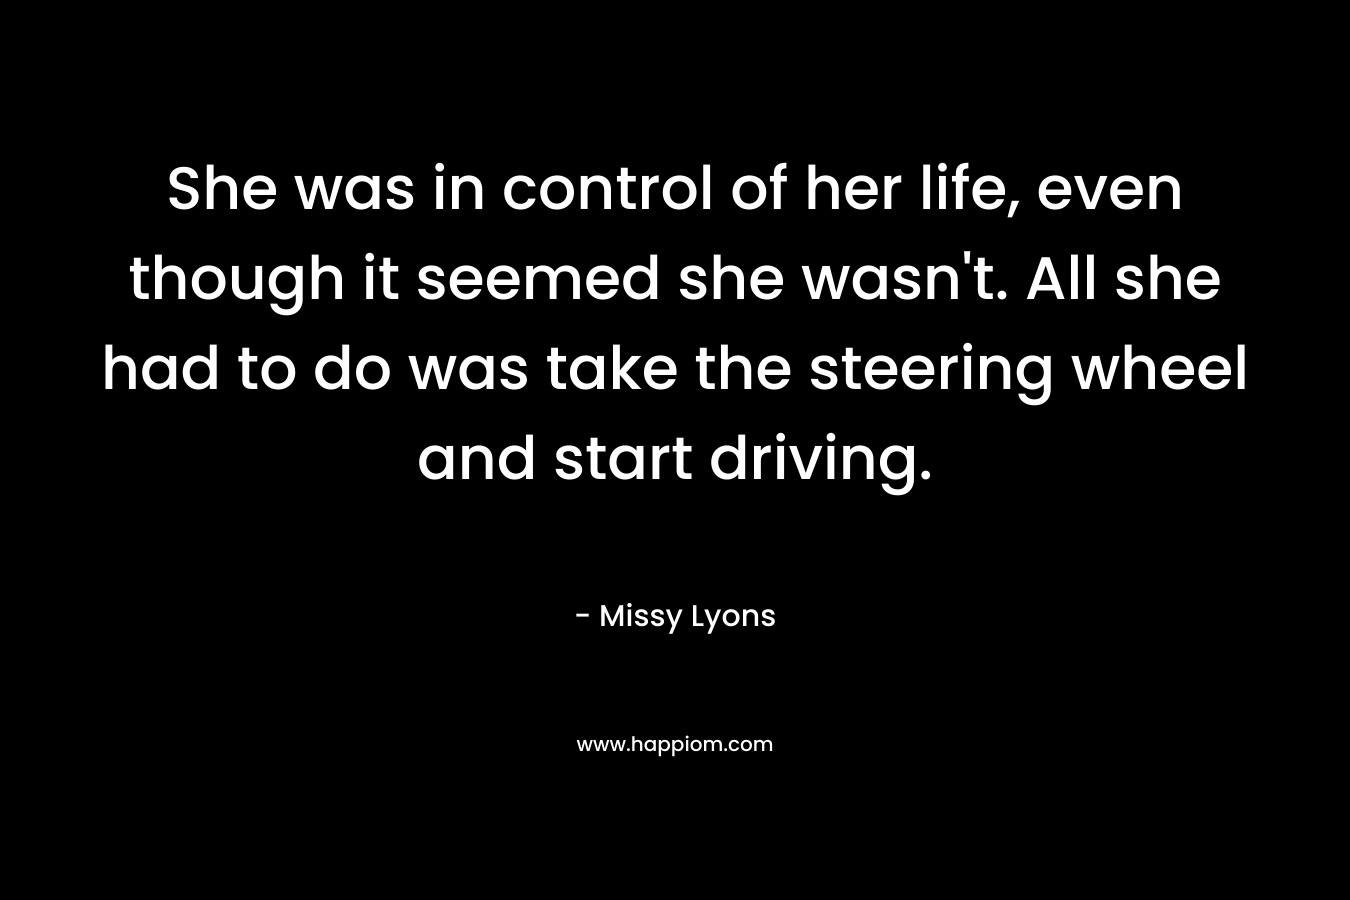 She was in control of her life, even though it seemed she wasn’t. All she had to do was take the steering wheel and start driving. – Missy Lyons